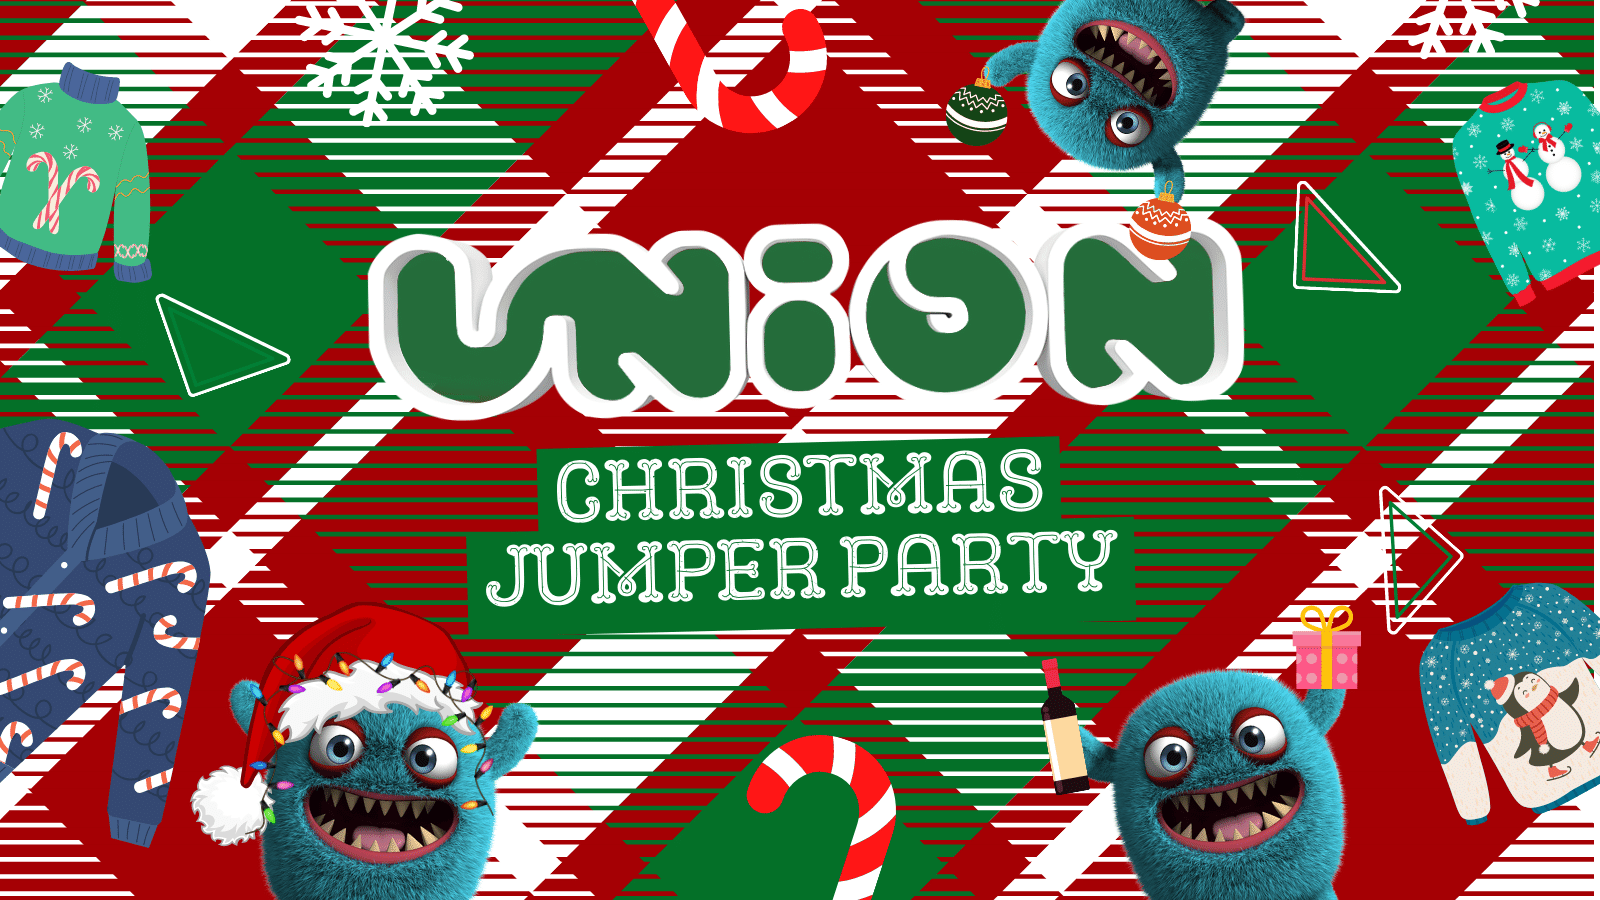 UNION TUESDAY’S PRESENT THE CHRISTMAS JUMPER PARTY